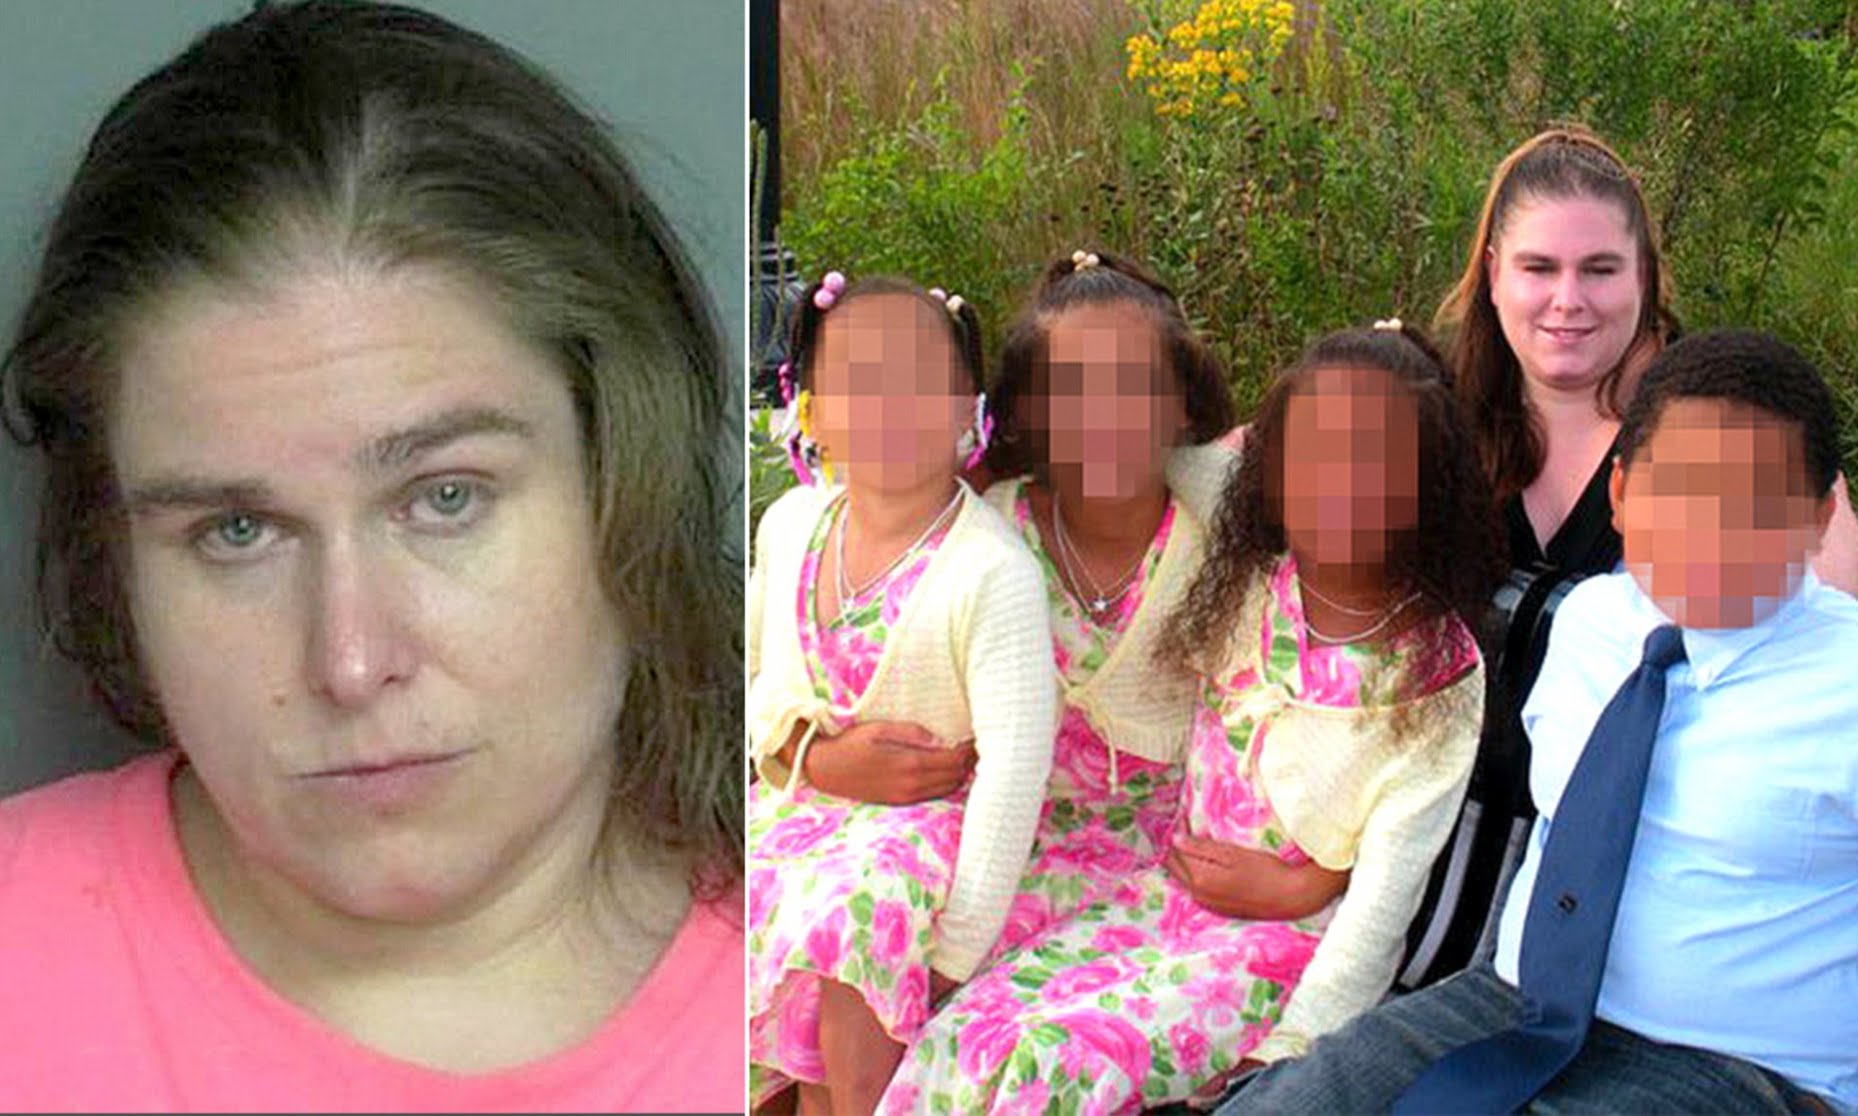 Wisconsin Mother, 39, Is Arrested For Pimping Out Her Two Young Children, S...